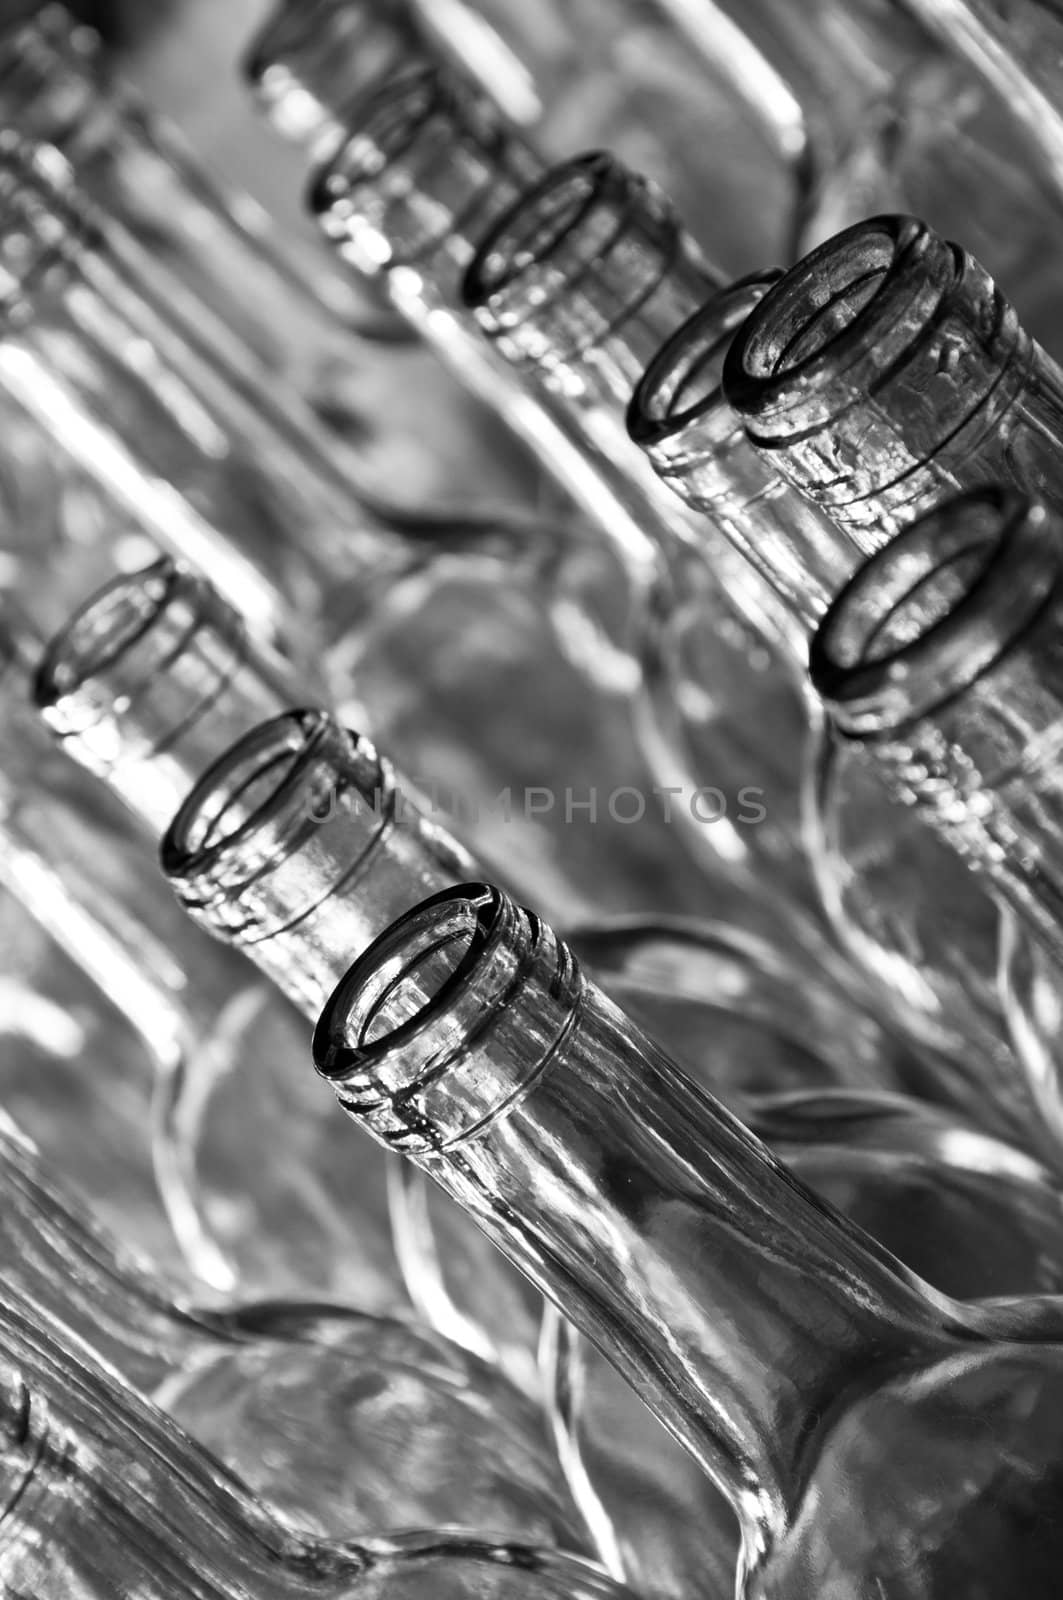 Black & white angled closeup of clean & clear empty wine bottles lined up waiting to be filled at a winery